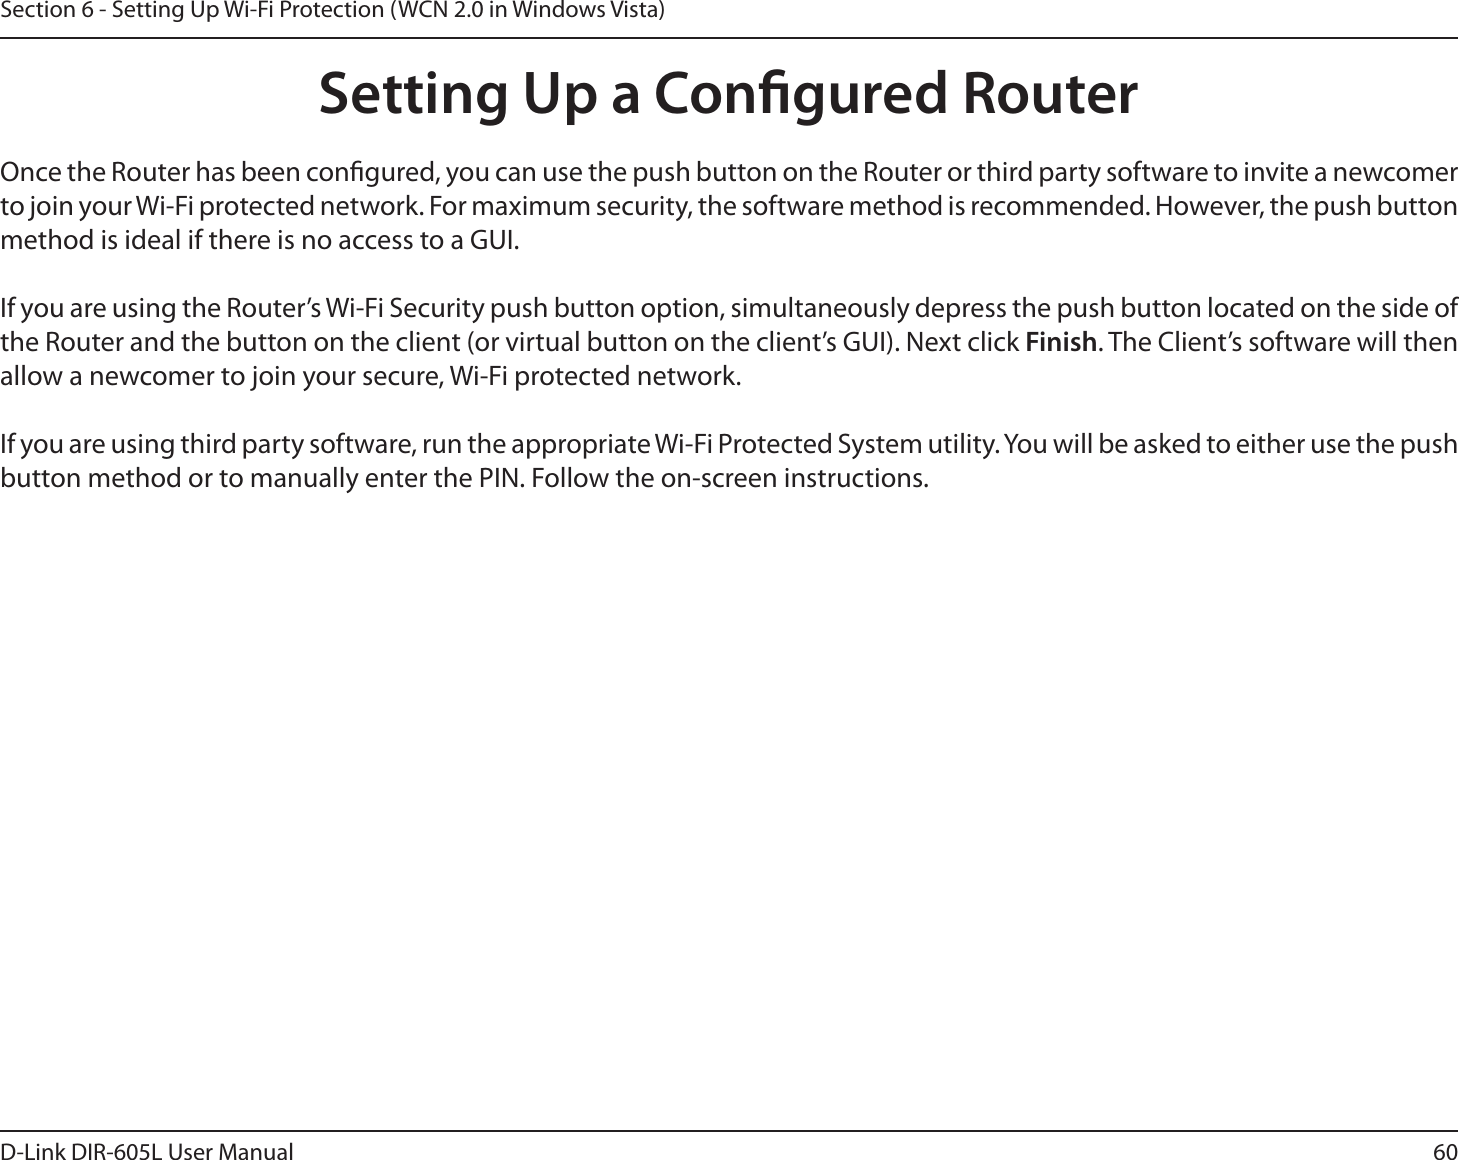 60D-Link DIR-605L User ManualSection 6 - Setting Up Wi-Fi Protection (WCN 2.0 in Windows Vista)Setting Up a Congured RouterOnce the Router has been congured, you can use the push button on the Router or third party software to invite a newcomer to join your Wi-Fi protected network. For maximum security, the software method is recommended. However, the push button method is ideal if there is no access to a GUI.If you are using the Router’s Wi-Fi Security push button option, simultaneously depress the push button located on the side of the Router and the button on the client (or virtual button on the client’s GUI). Next click Finish. The Client’s software will then allow a newcomer to join your secure, Wi-Fi protected network.If you are using third party software, run the appropriate Wi-Fi Protected System utility. You will be asked to either use the push button method or to manually enter the PIN. Follow the on-screen instructions.        